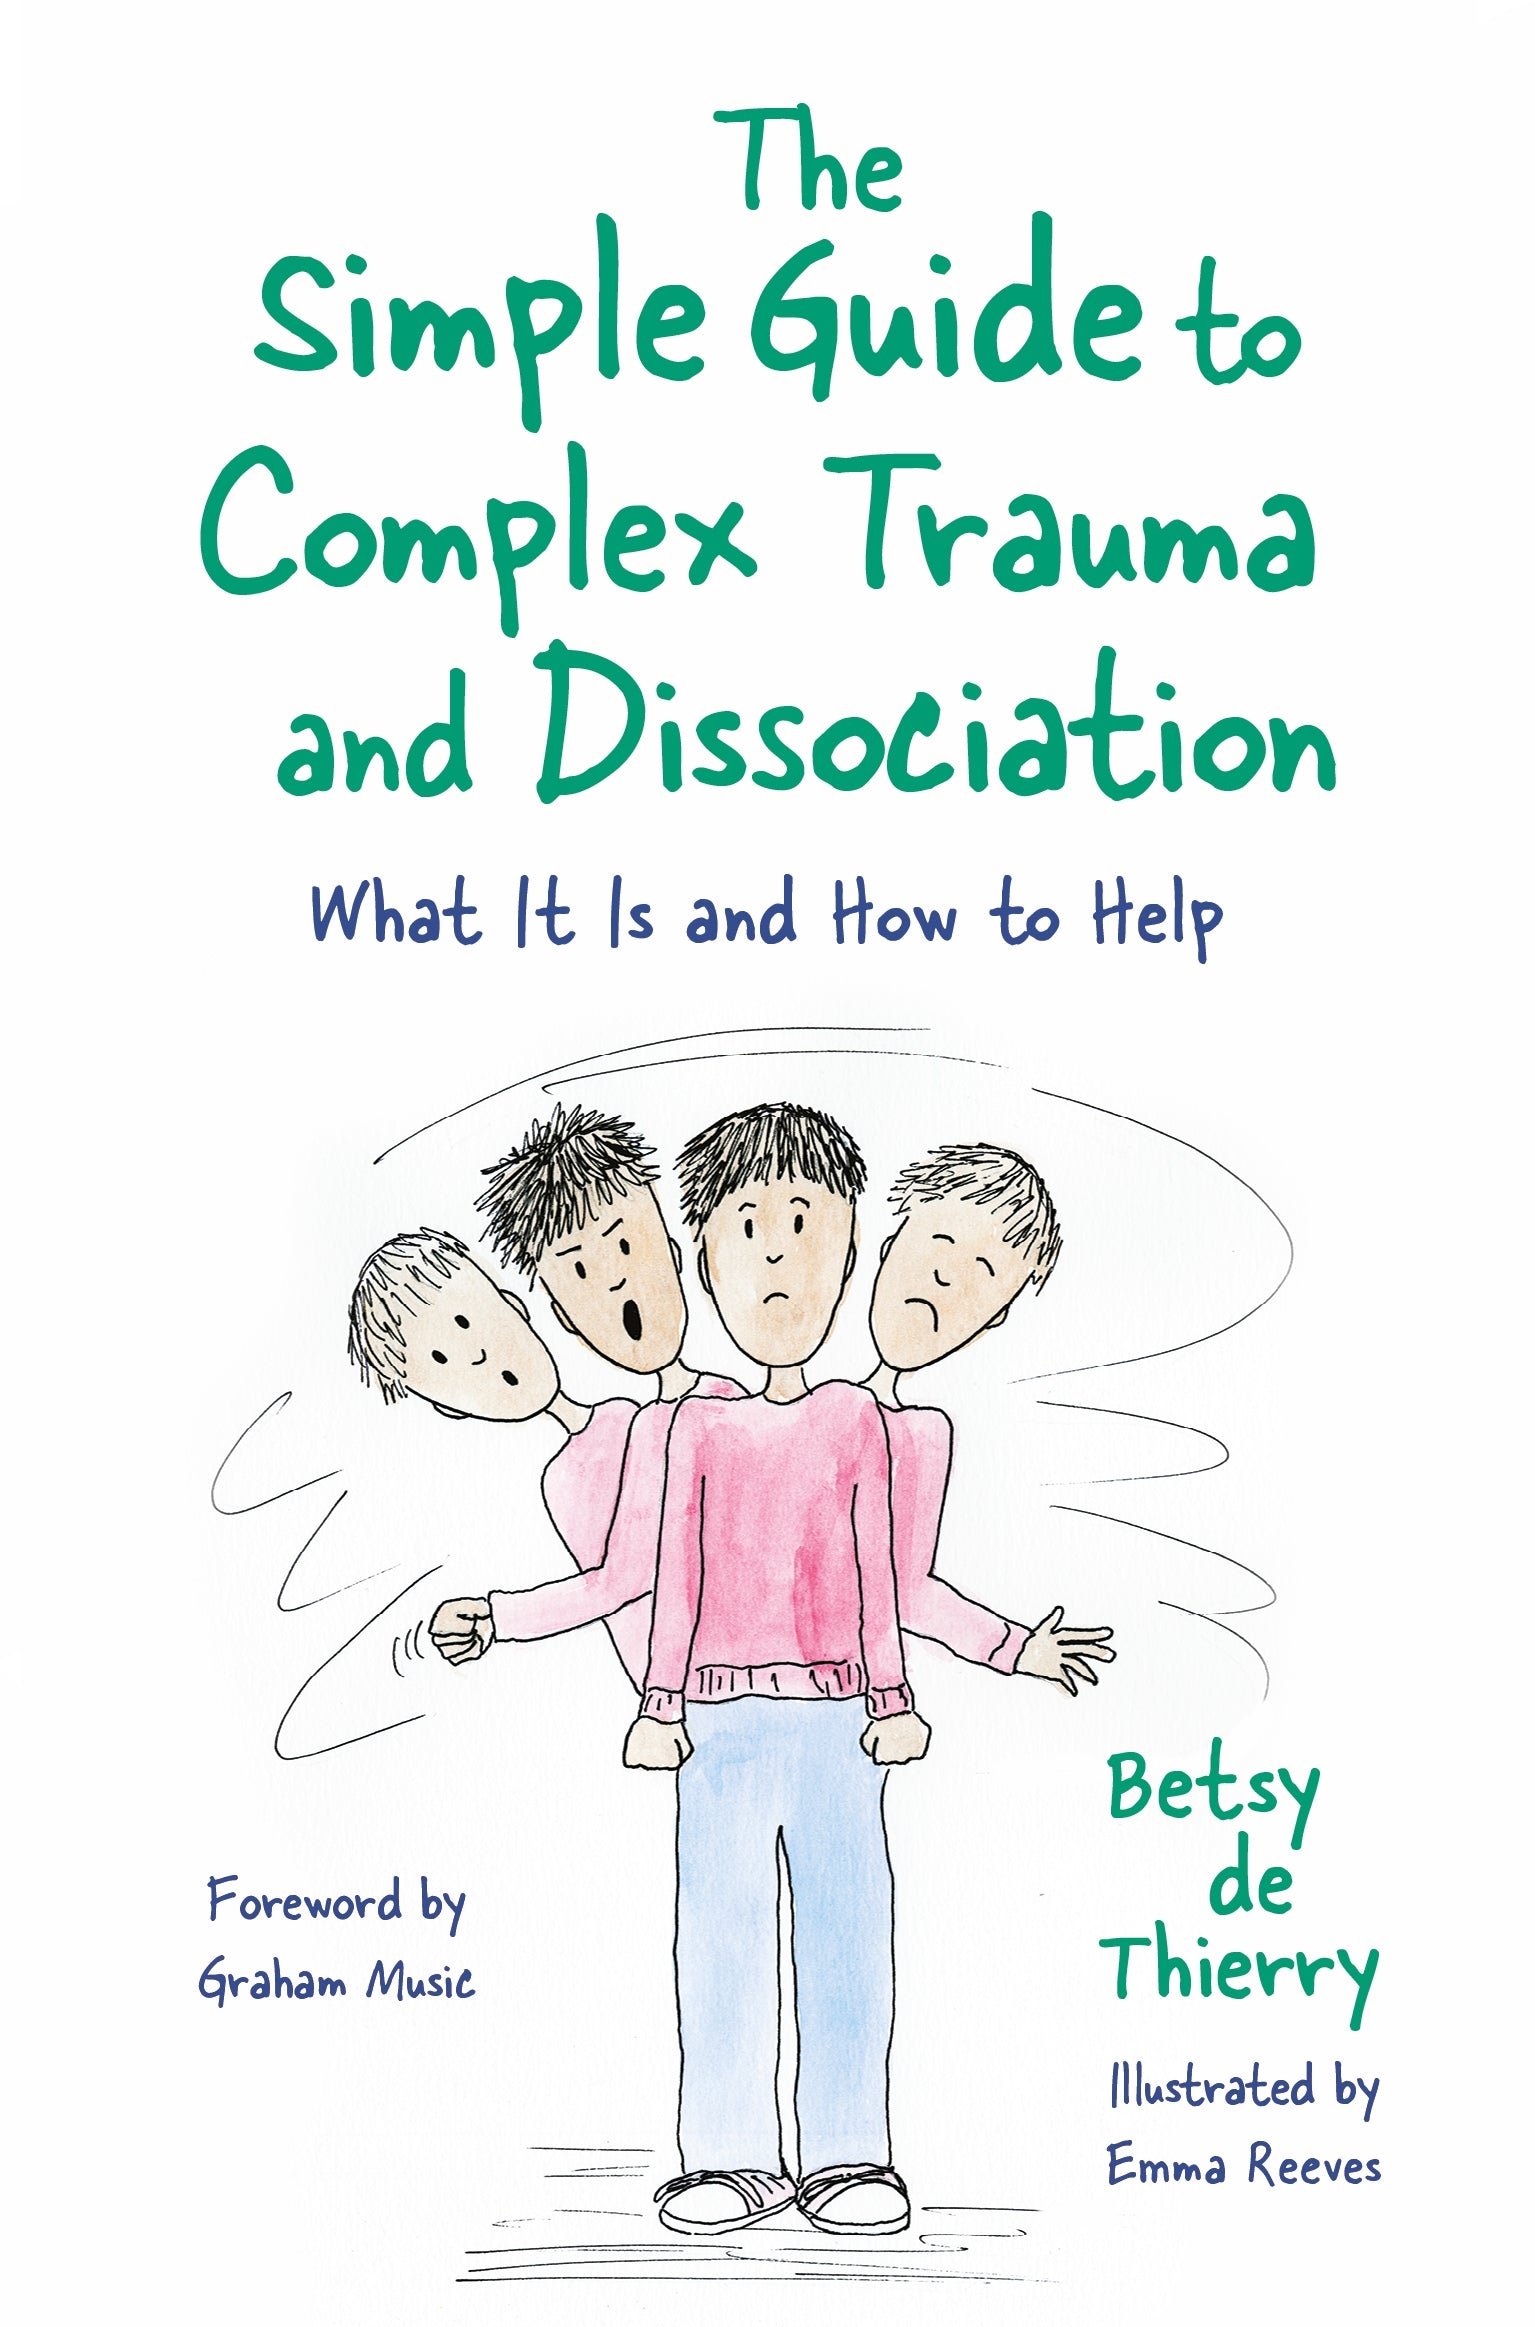 The Simple Guide to Complex Trauma and Dissociation by Betsy de Thierry, Emma Reeves, Graham Music